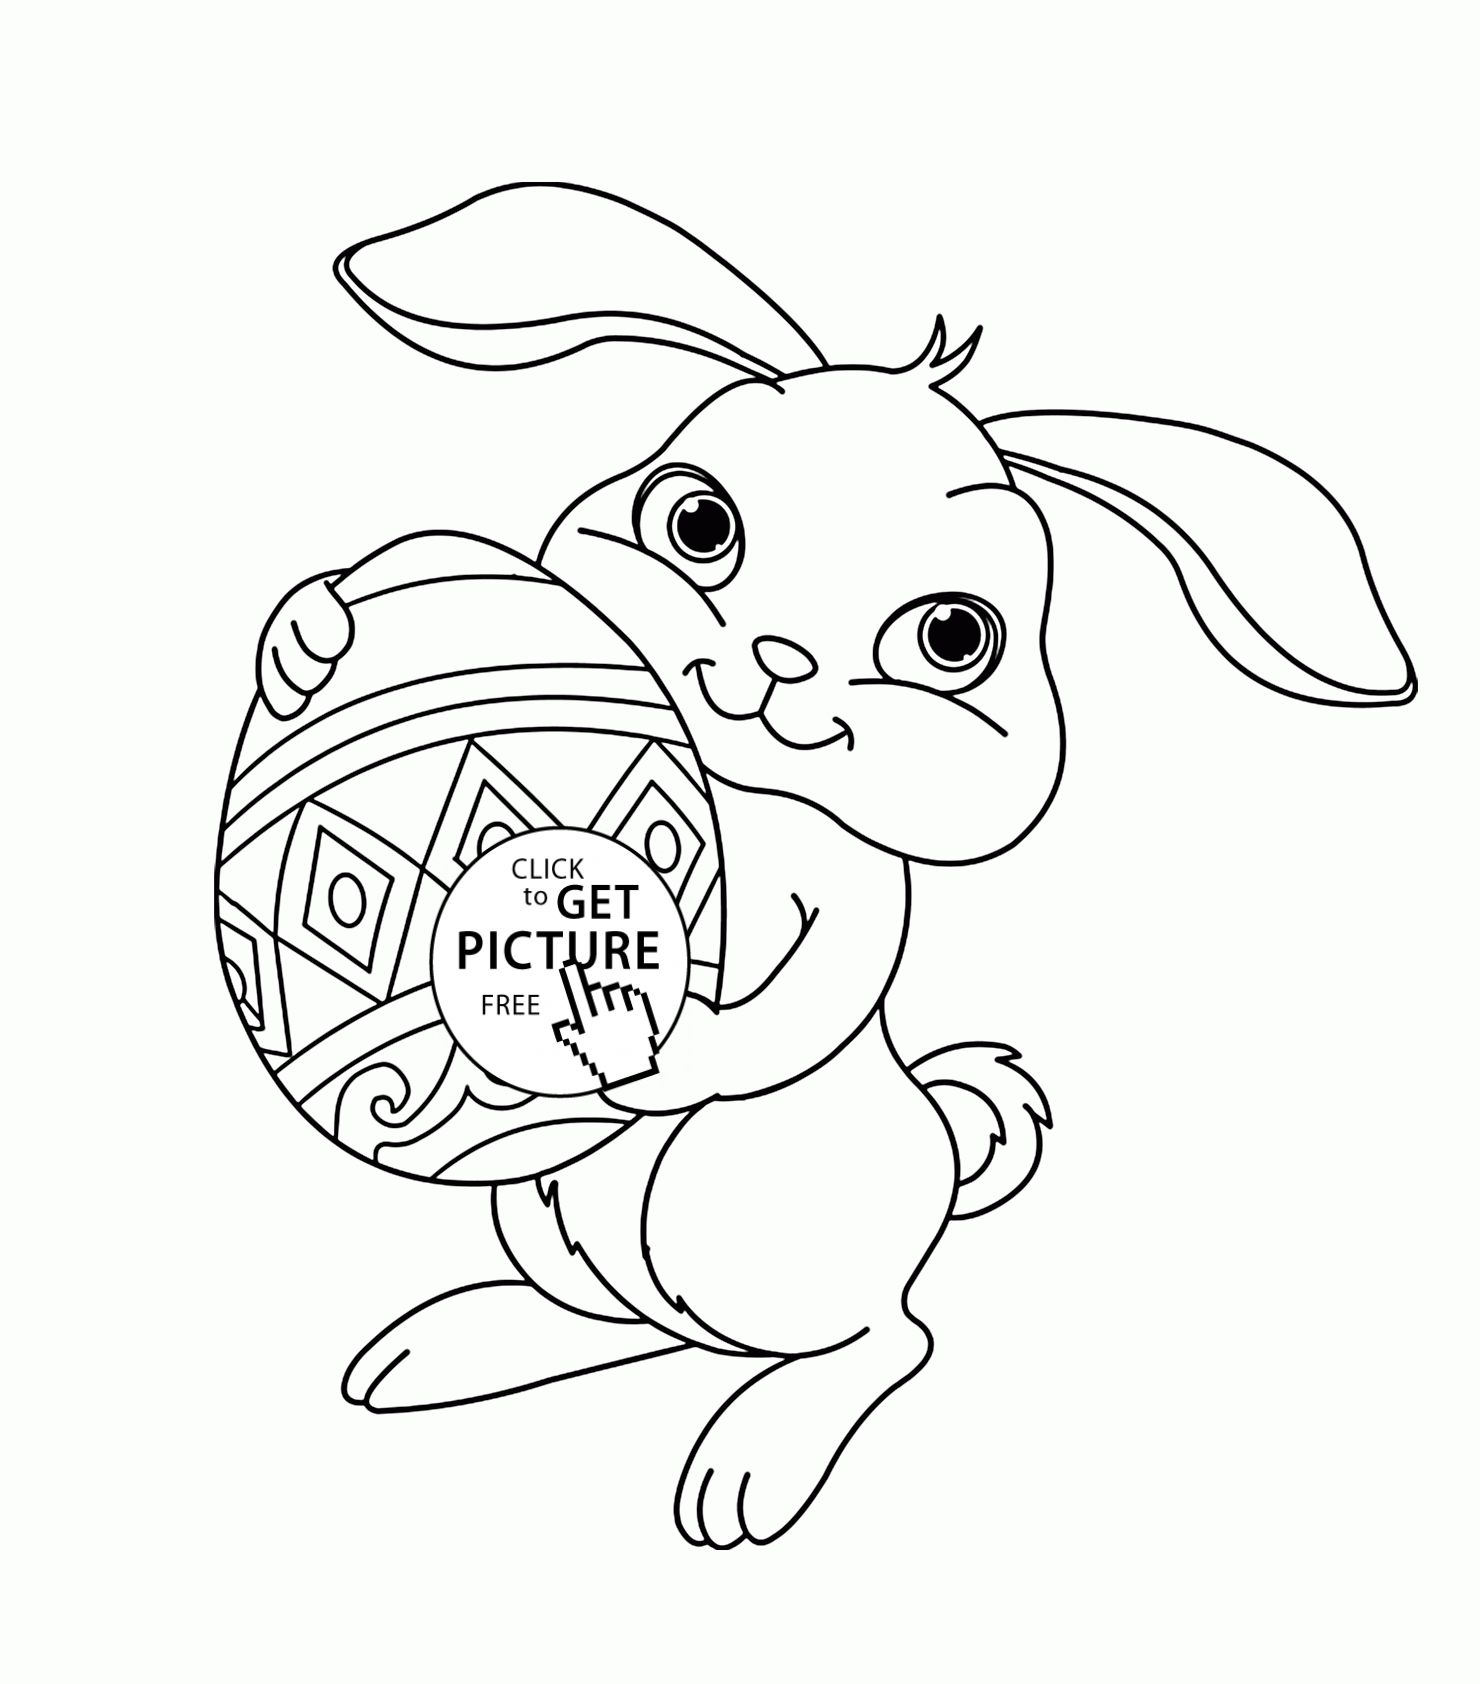 Bunny Coloring Pages For Free   Coloring Home